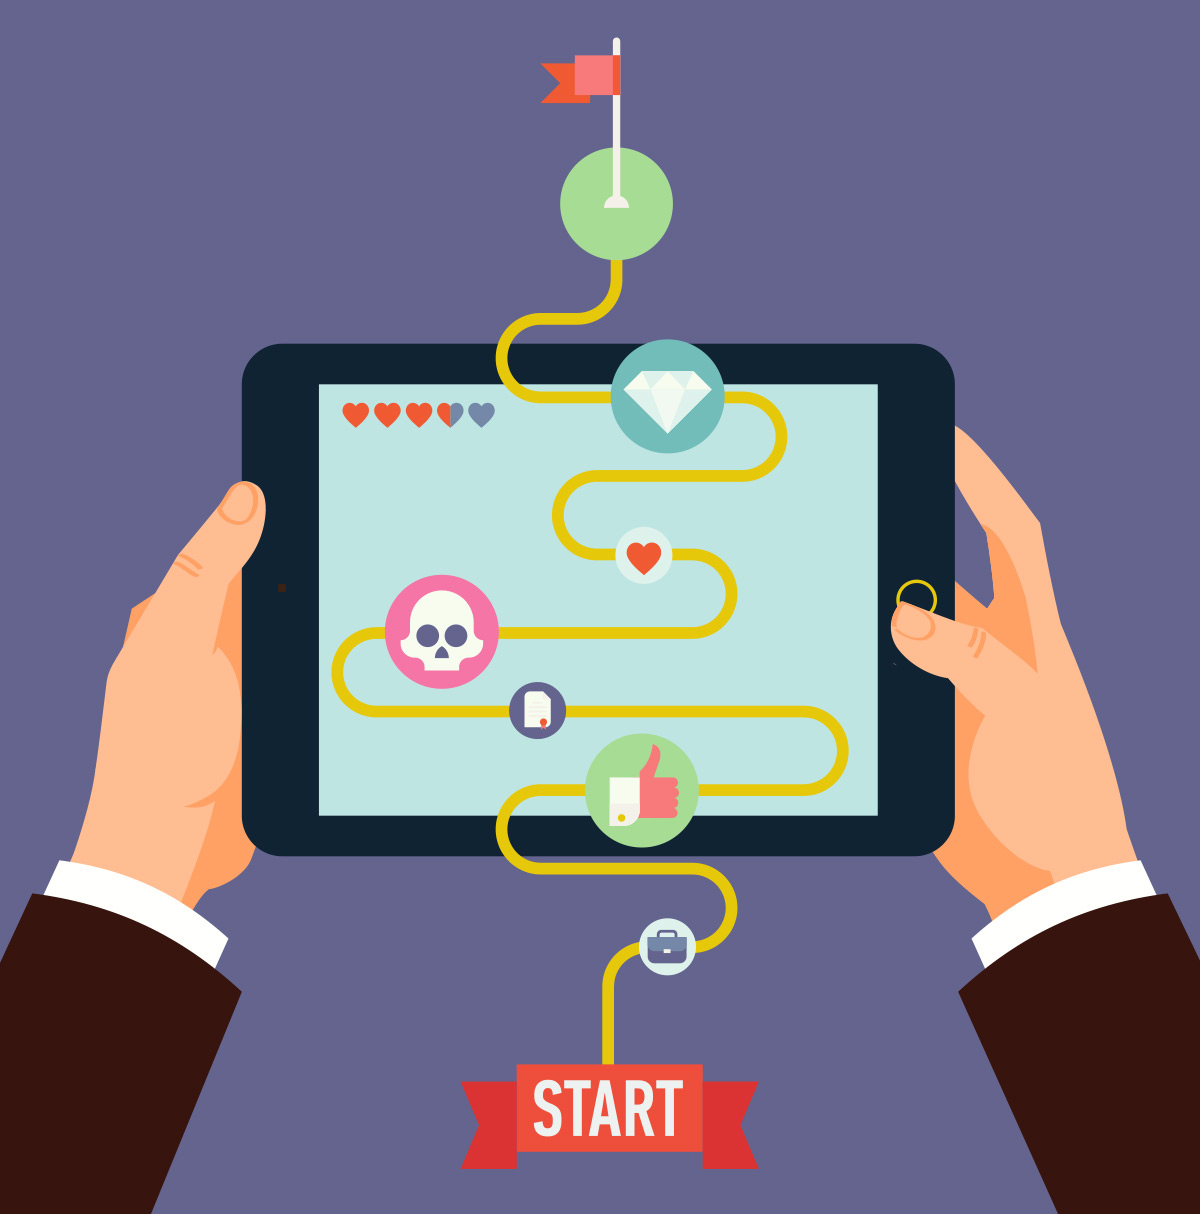 In 2019, corporate training will be done through Gamification !